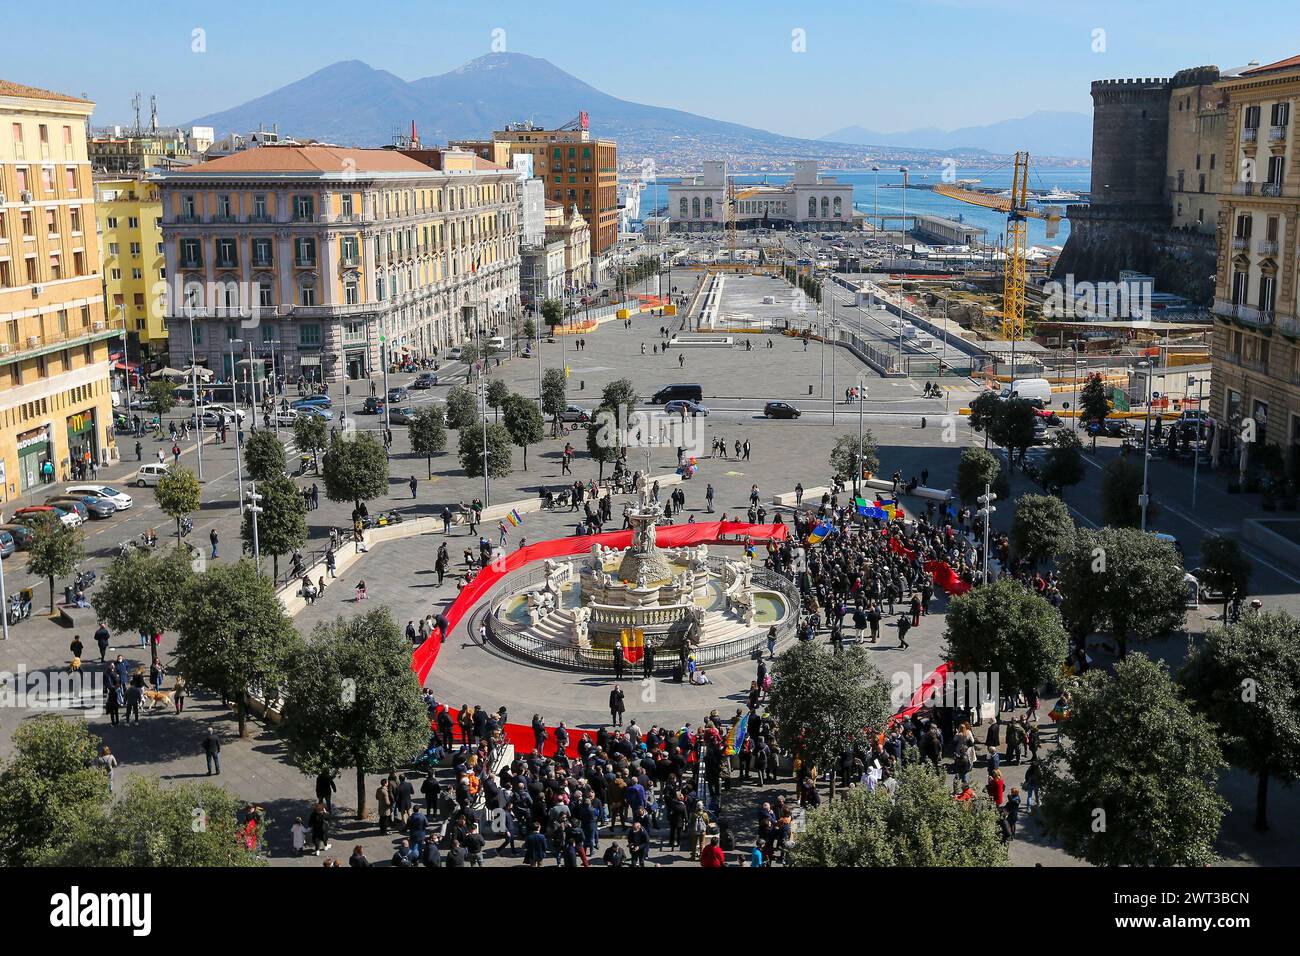 People with a giant red flag, in Municipio square, symbolizing the blood shed in war,  in front of the Town Hall of Naples, during the demonstration f Stock Photo